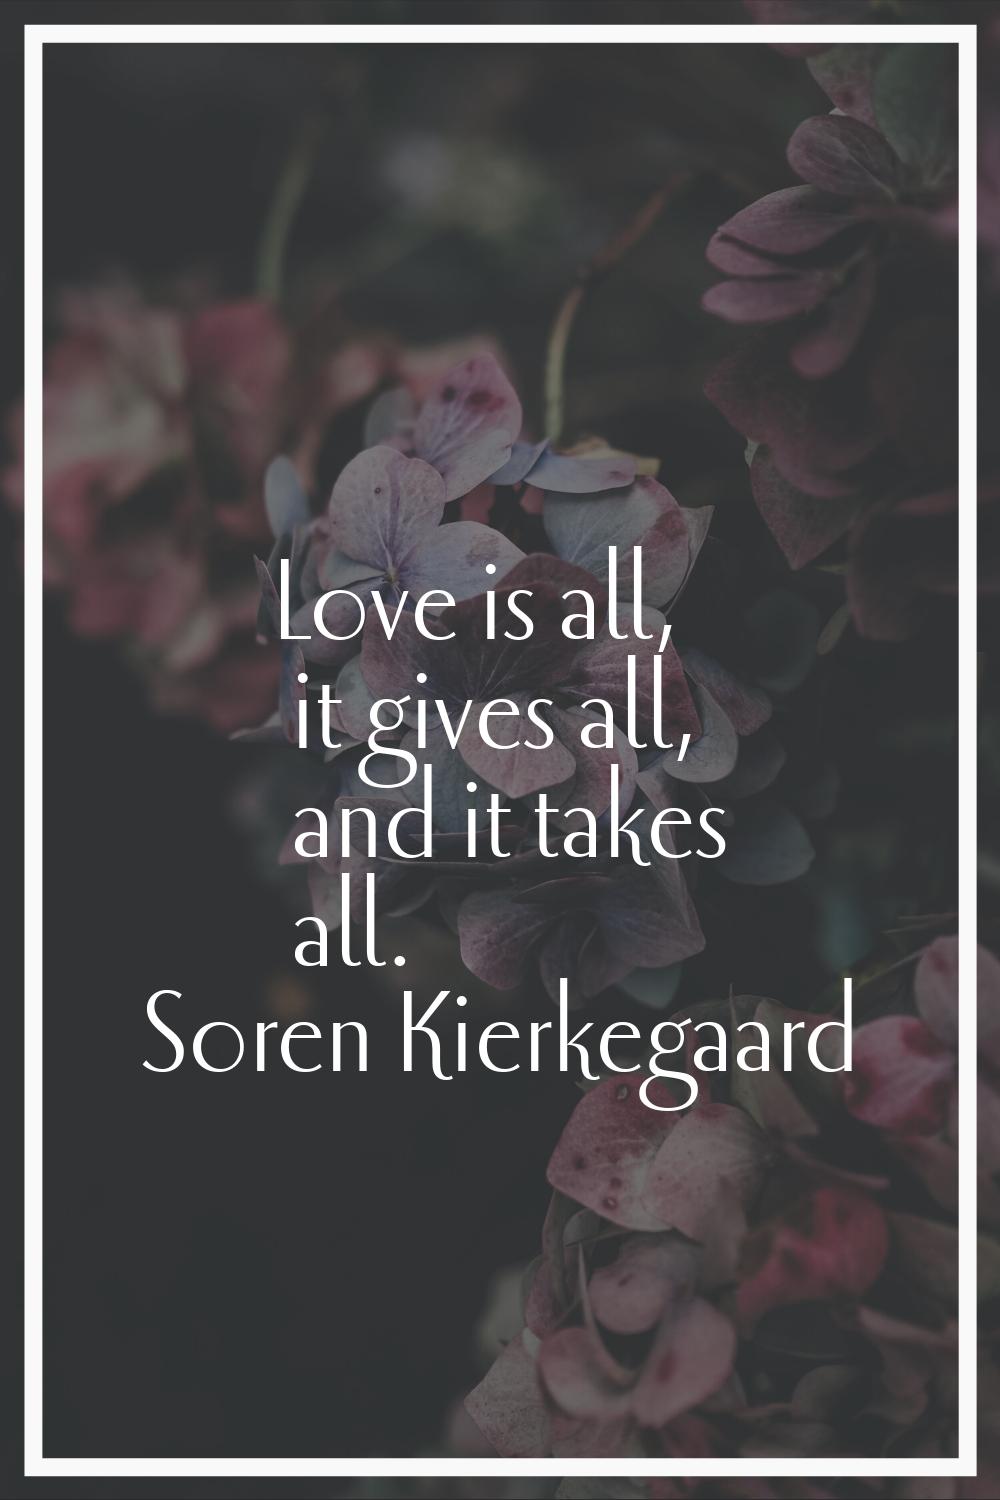 Love is all, it gives all, and it takes all.